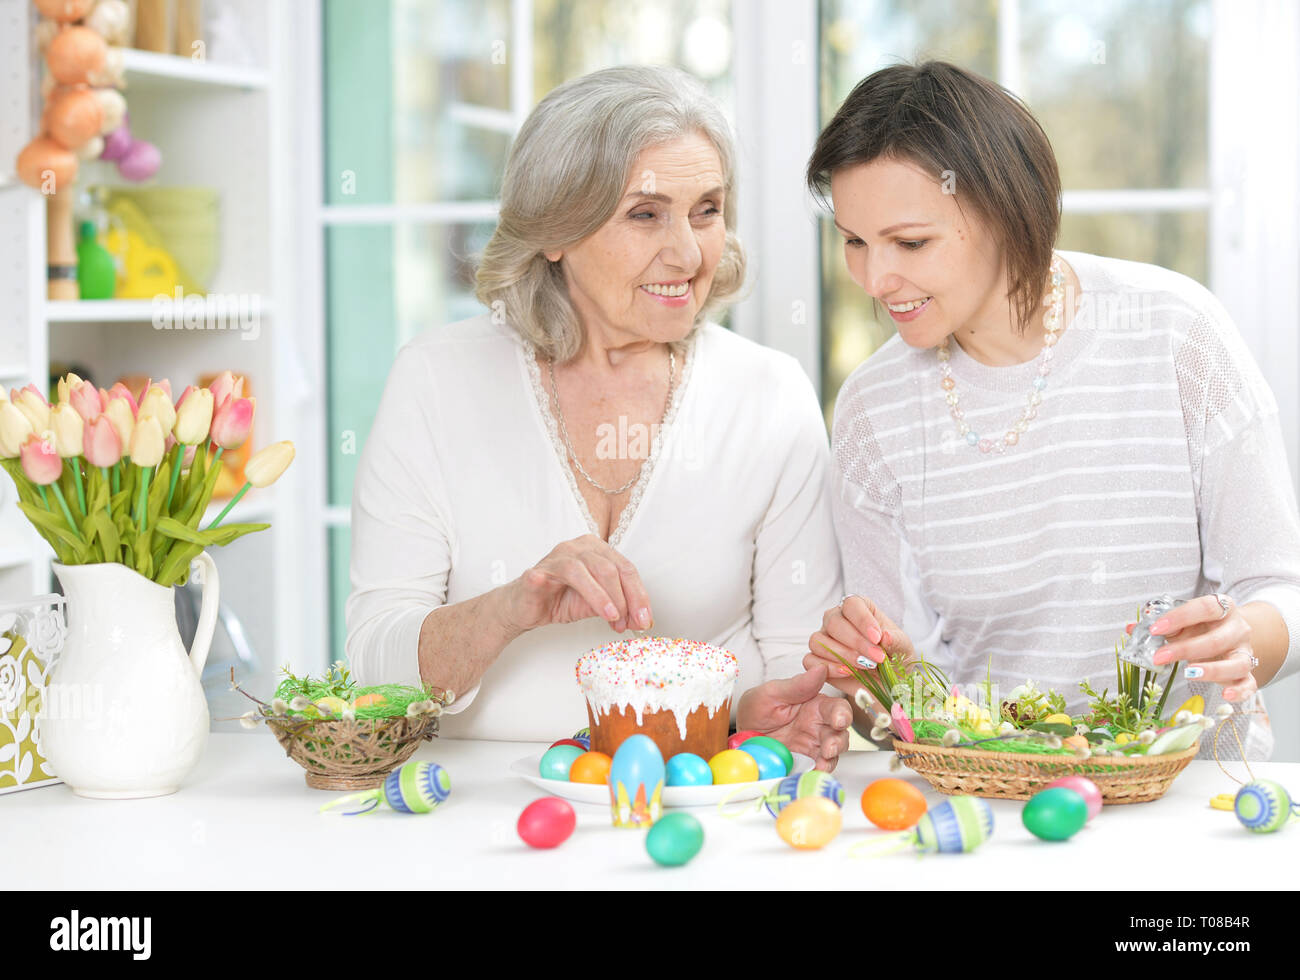 Portrait of mother and daughter colouring eggs Stock Photo